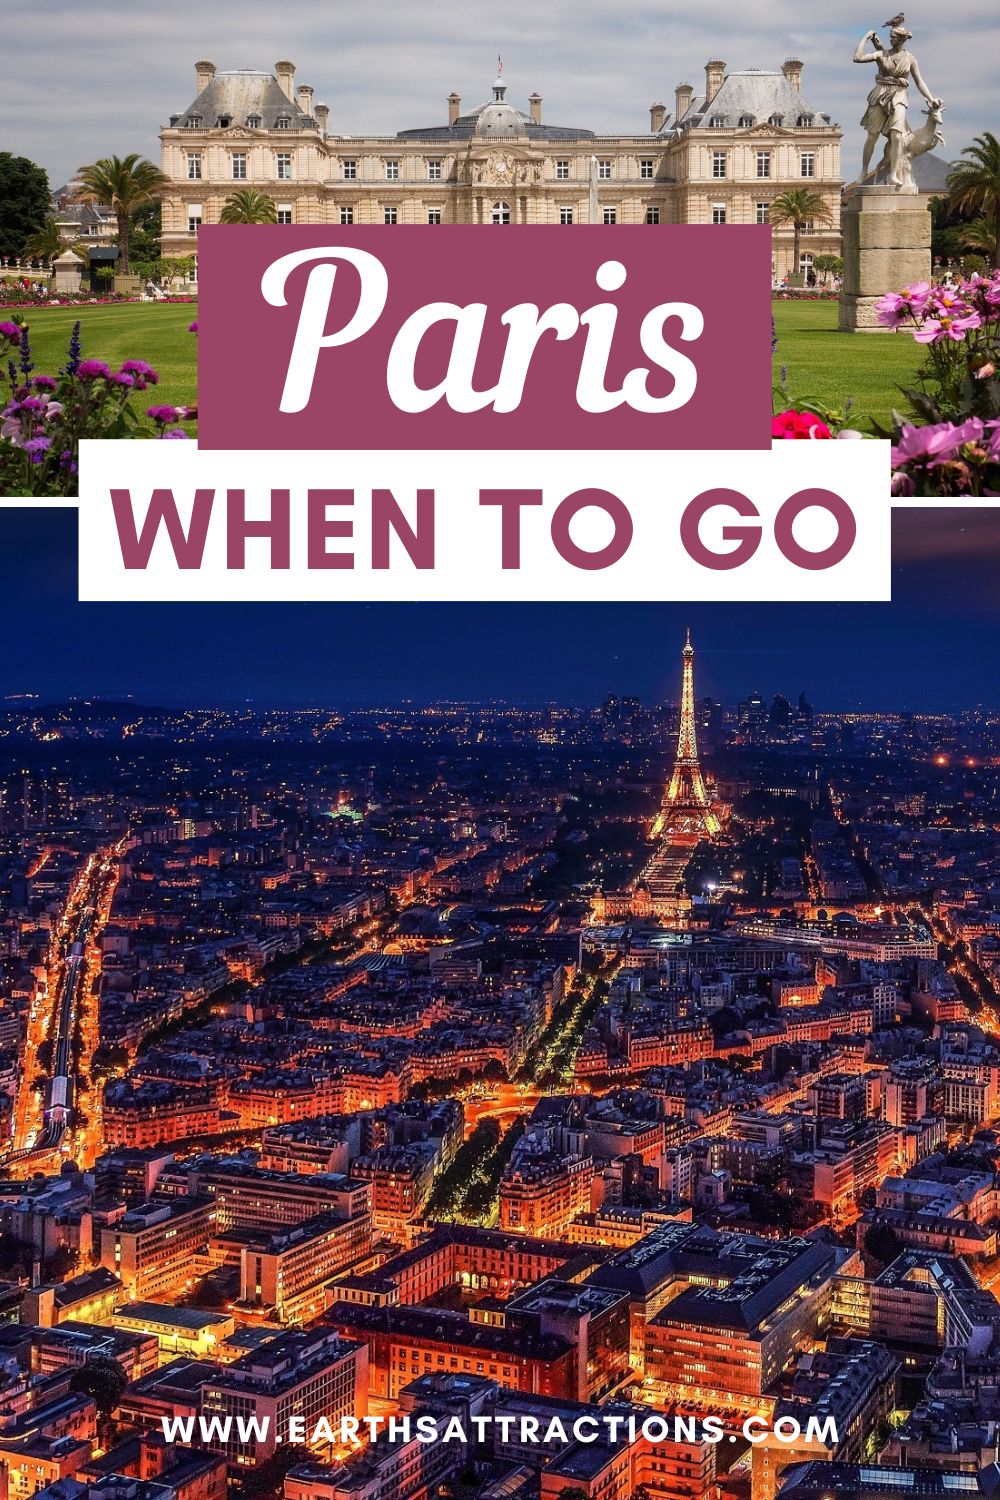 When to go to Paris. Discover the best months to visit Paris, France. This comprehensive article presents you the best time of year to visit Paris - for different preferences and budgets. #besttimetovisitparis #besttimeofyeartovisitparis #parisfrance #france #paristravel #europetravel #paristips